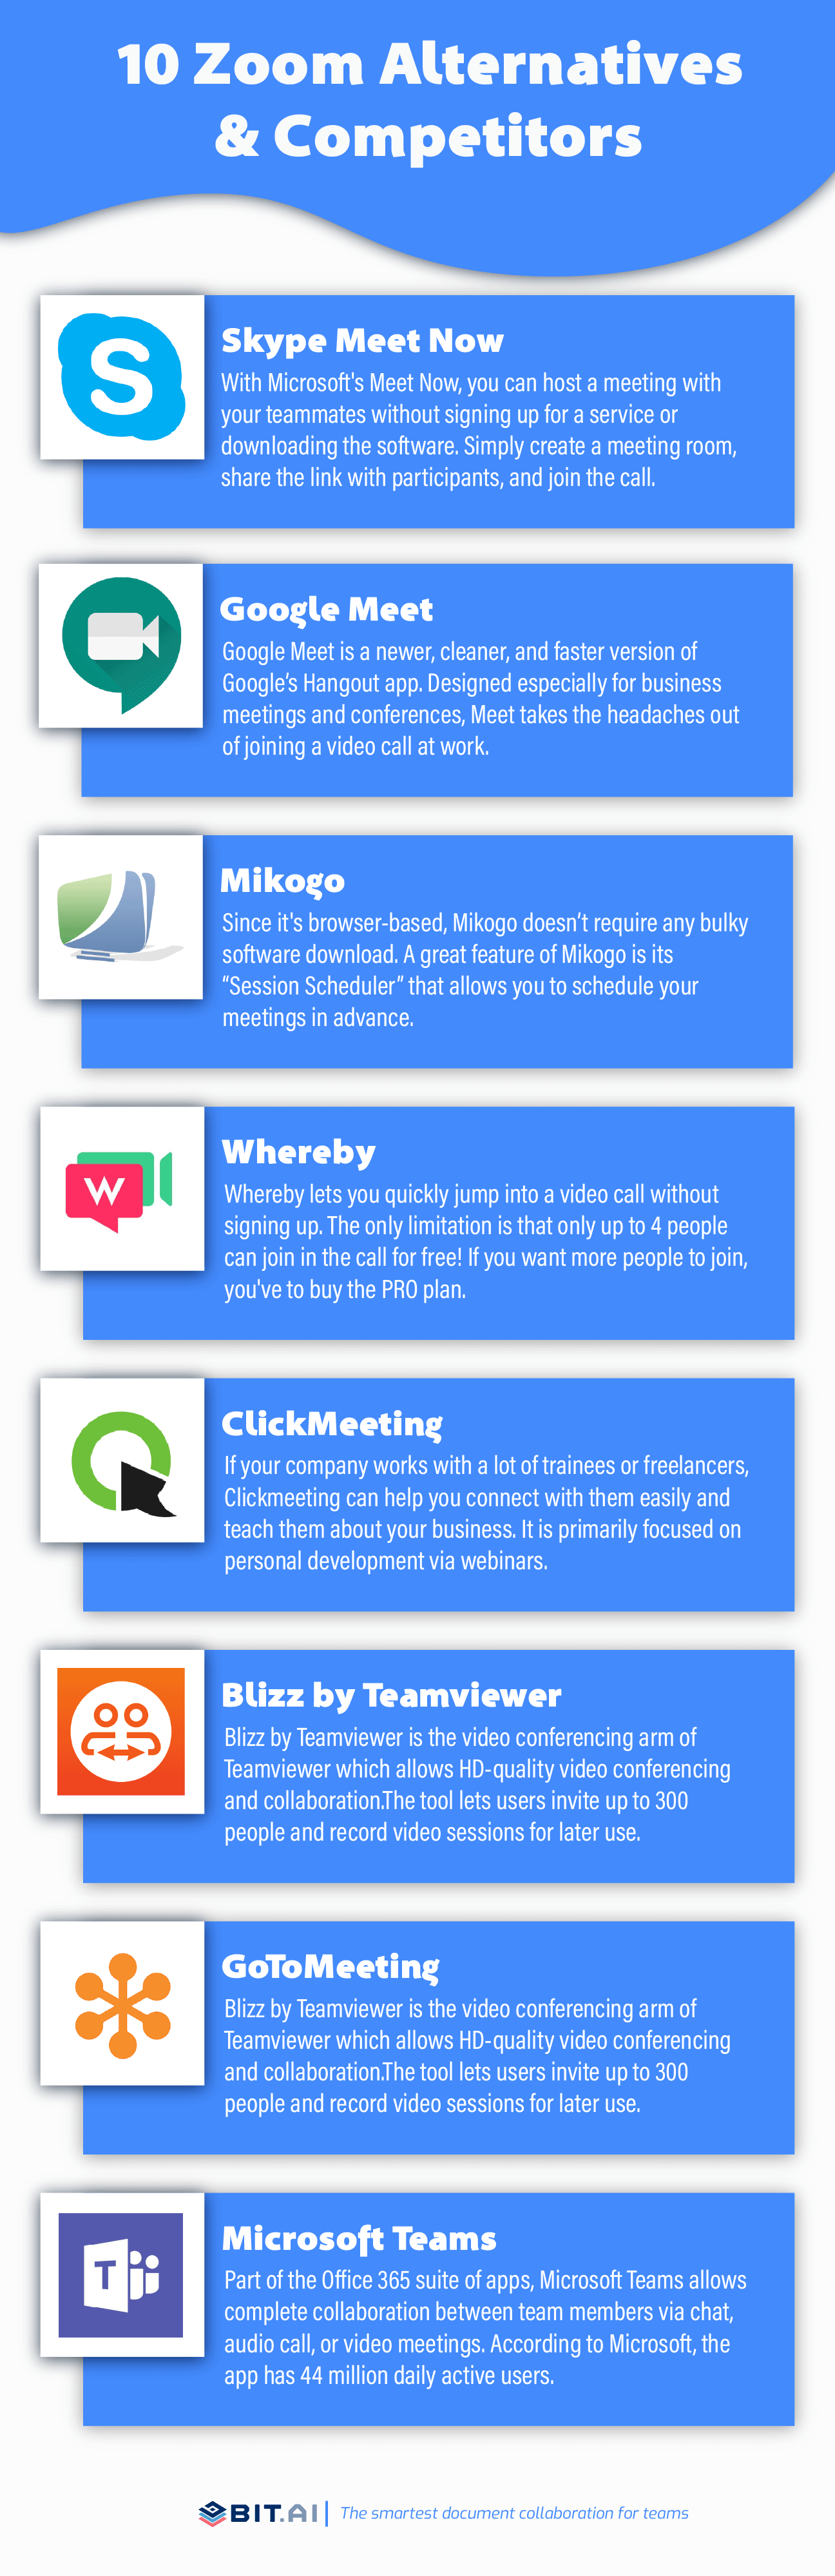 Zoom competitors and alternatiives infographic